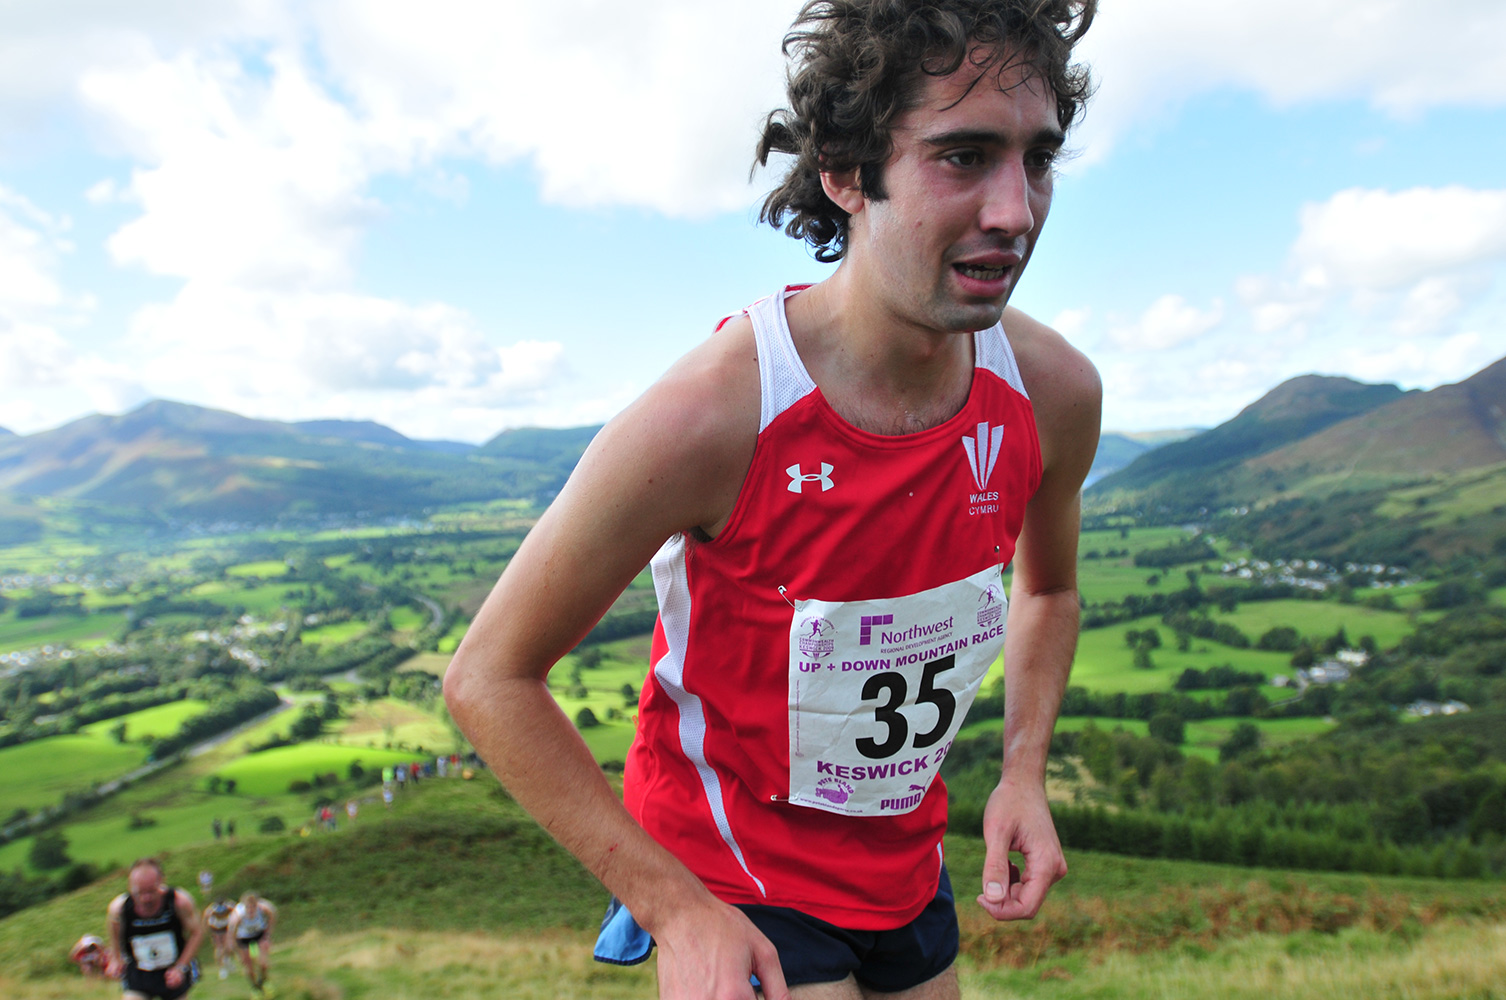 I shot this event for the I.A.U. in Keswick in September 2009.The mens' Fell Race.